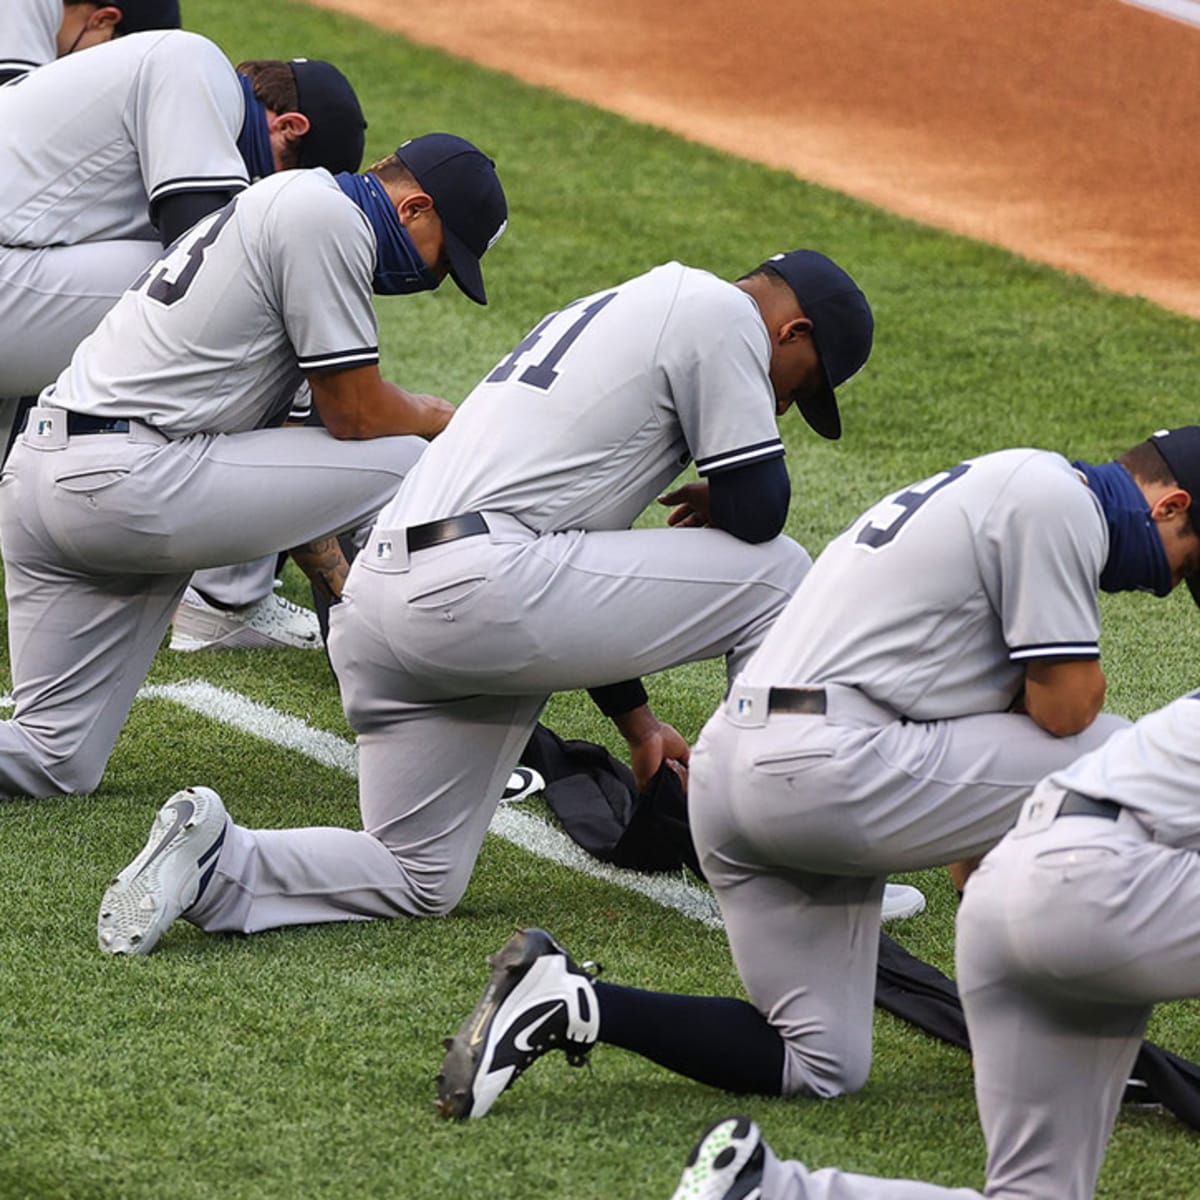 Yankees black players call on New York to make statement - Sports